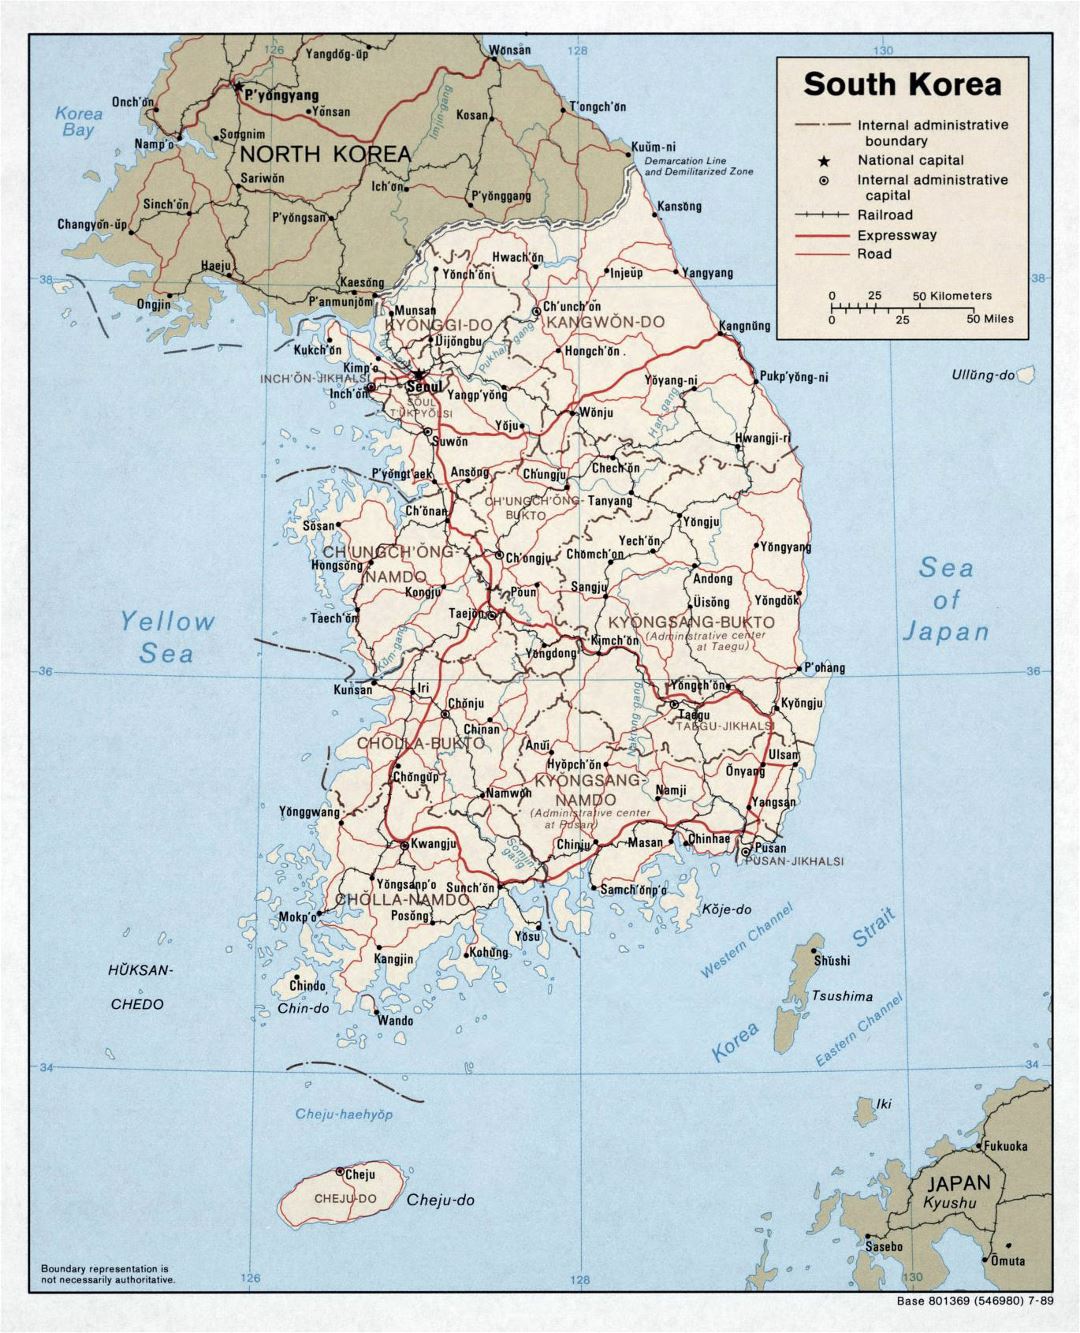 Large political and administrative map of South Korea with roads, railroads and major cities - 1989